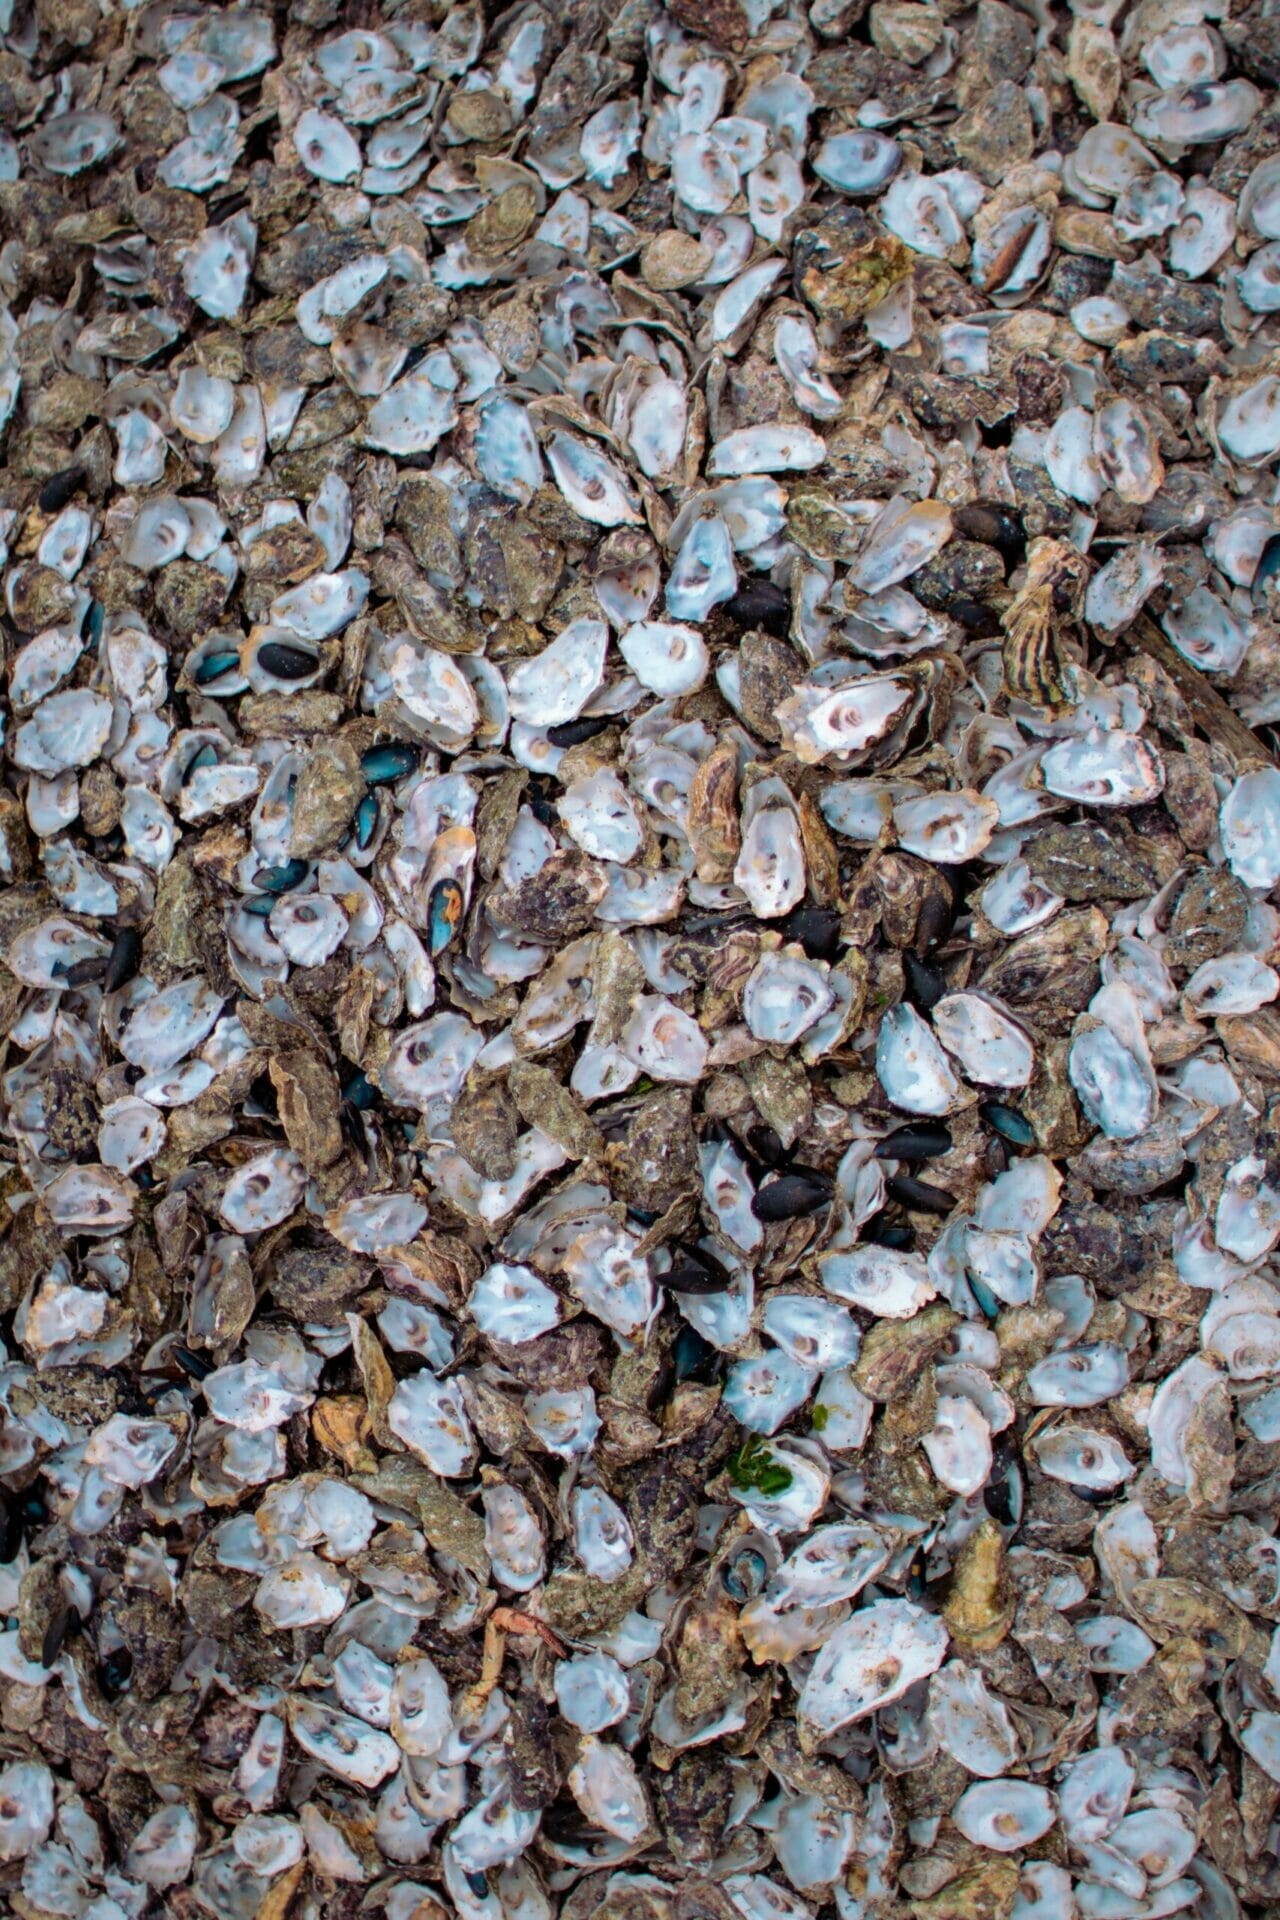 Surface covered in shucked oyster and mussel shells